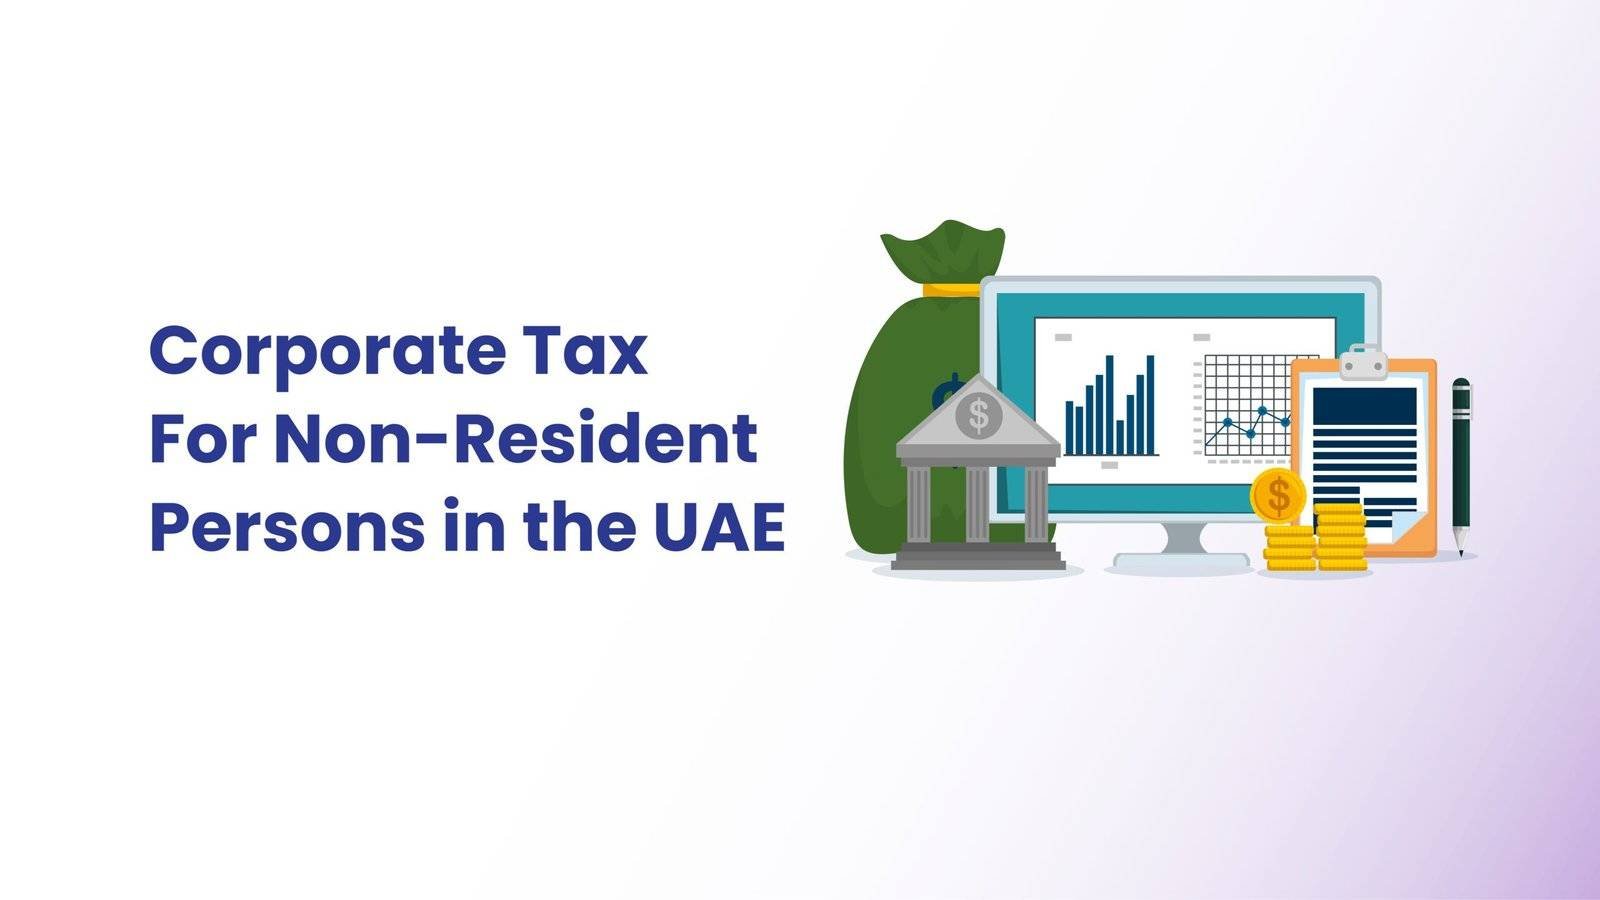 Corporate Tax For Non-Resident Persons in the UAE